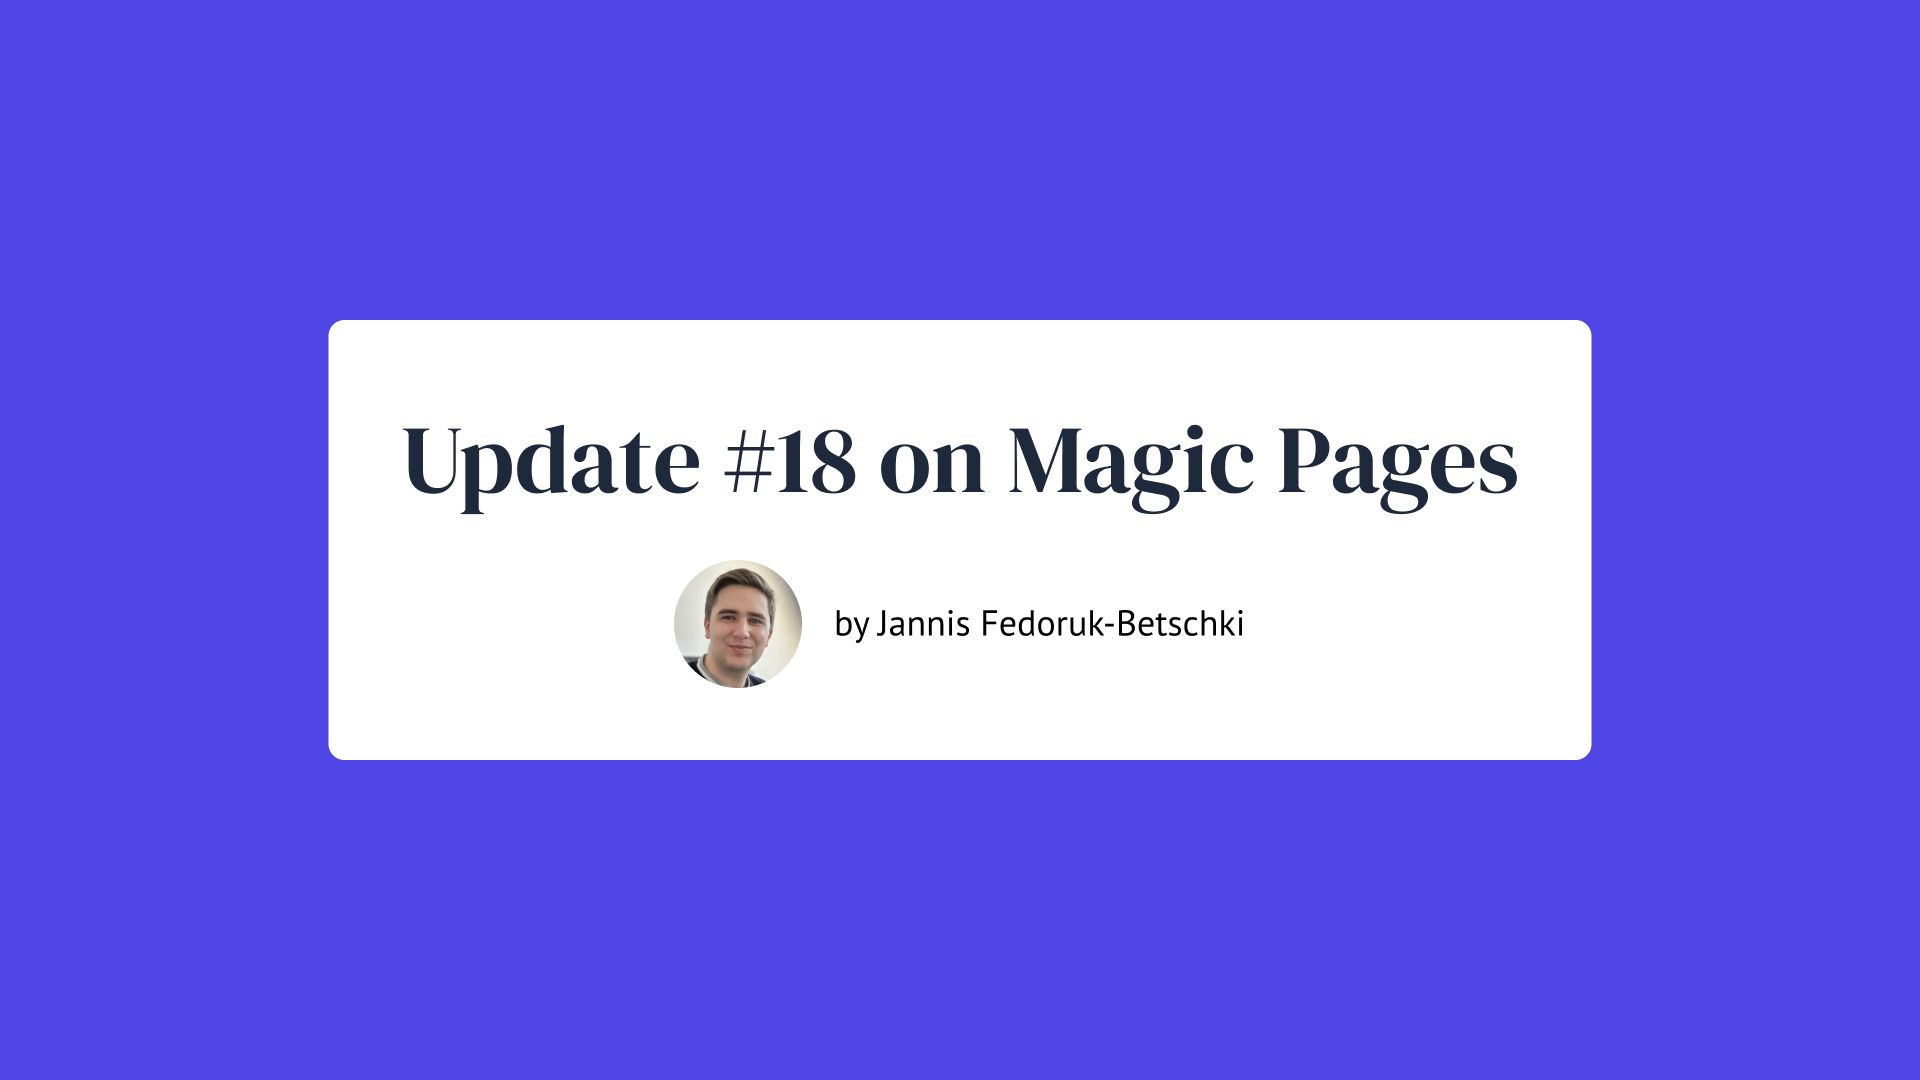 Update #18 on Magic Pages